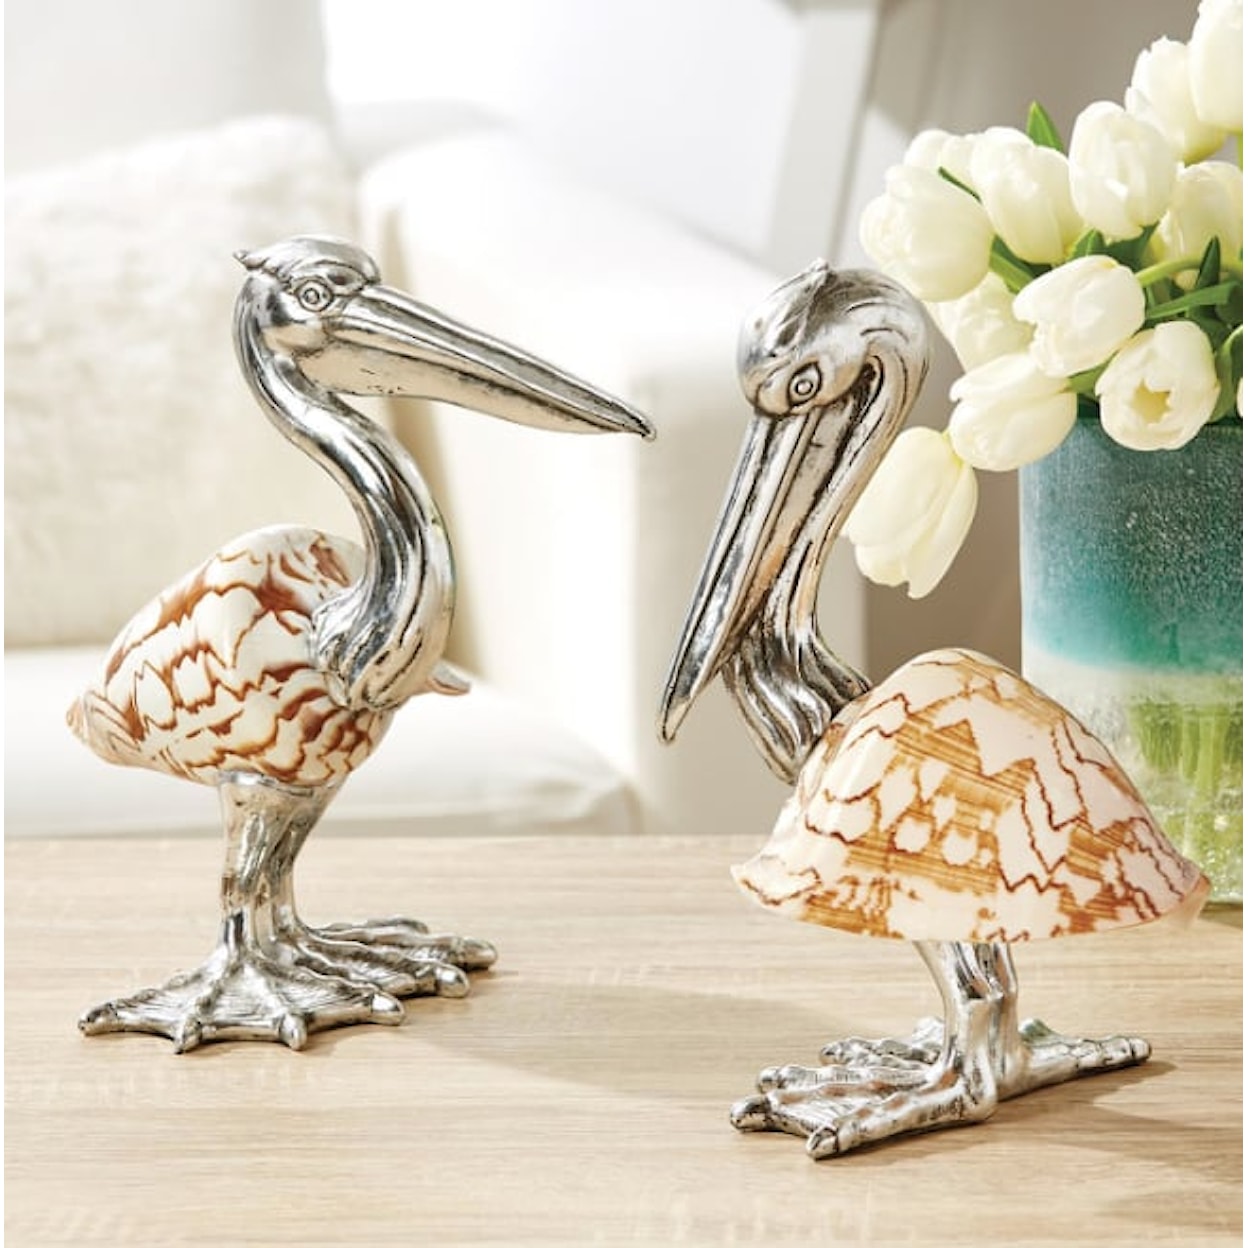 Two's Company Coastal Chic Set of 2 Shell Sculpture Pelicans